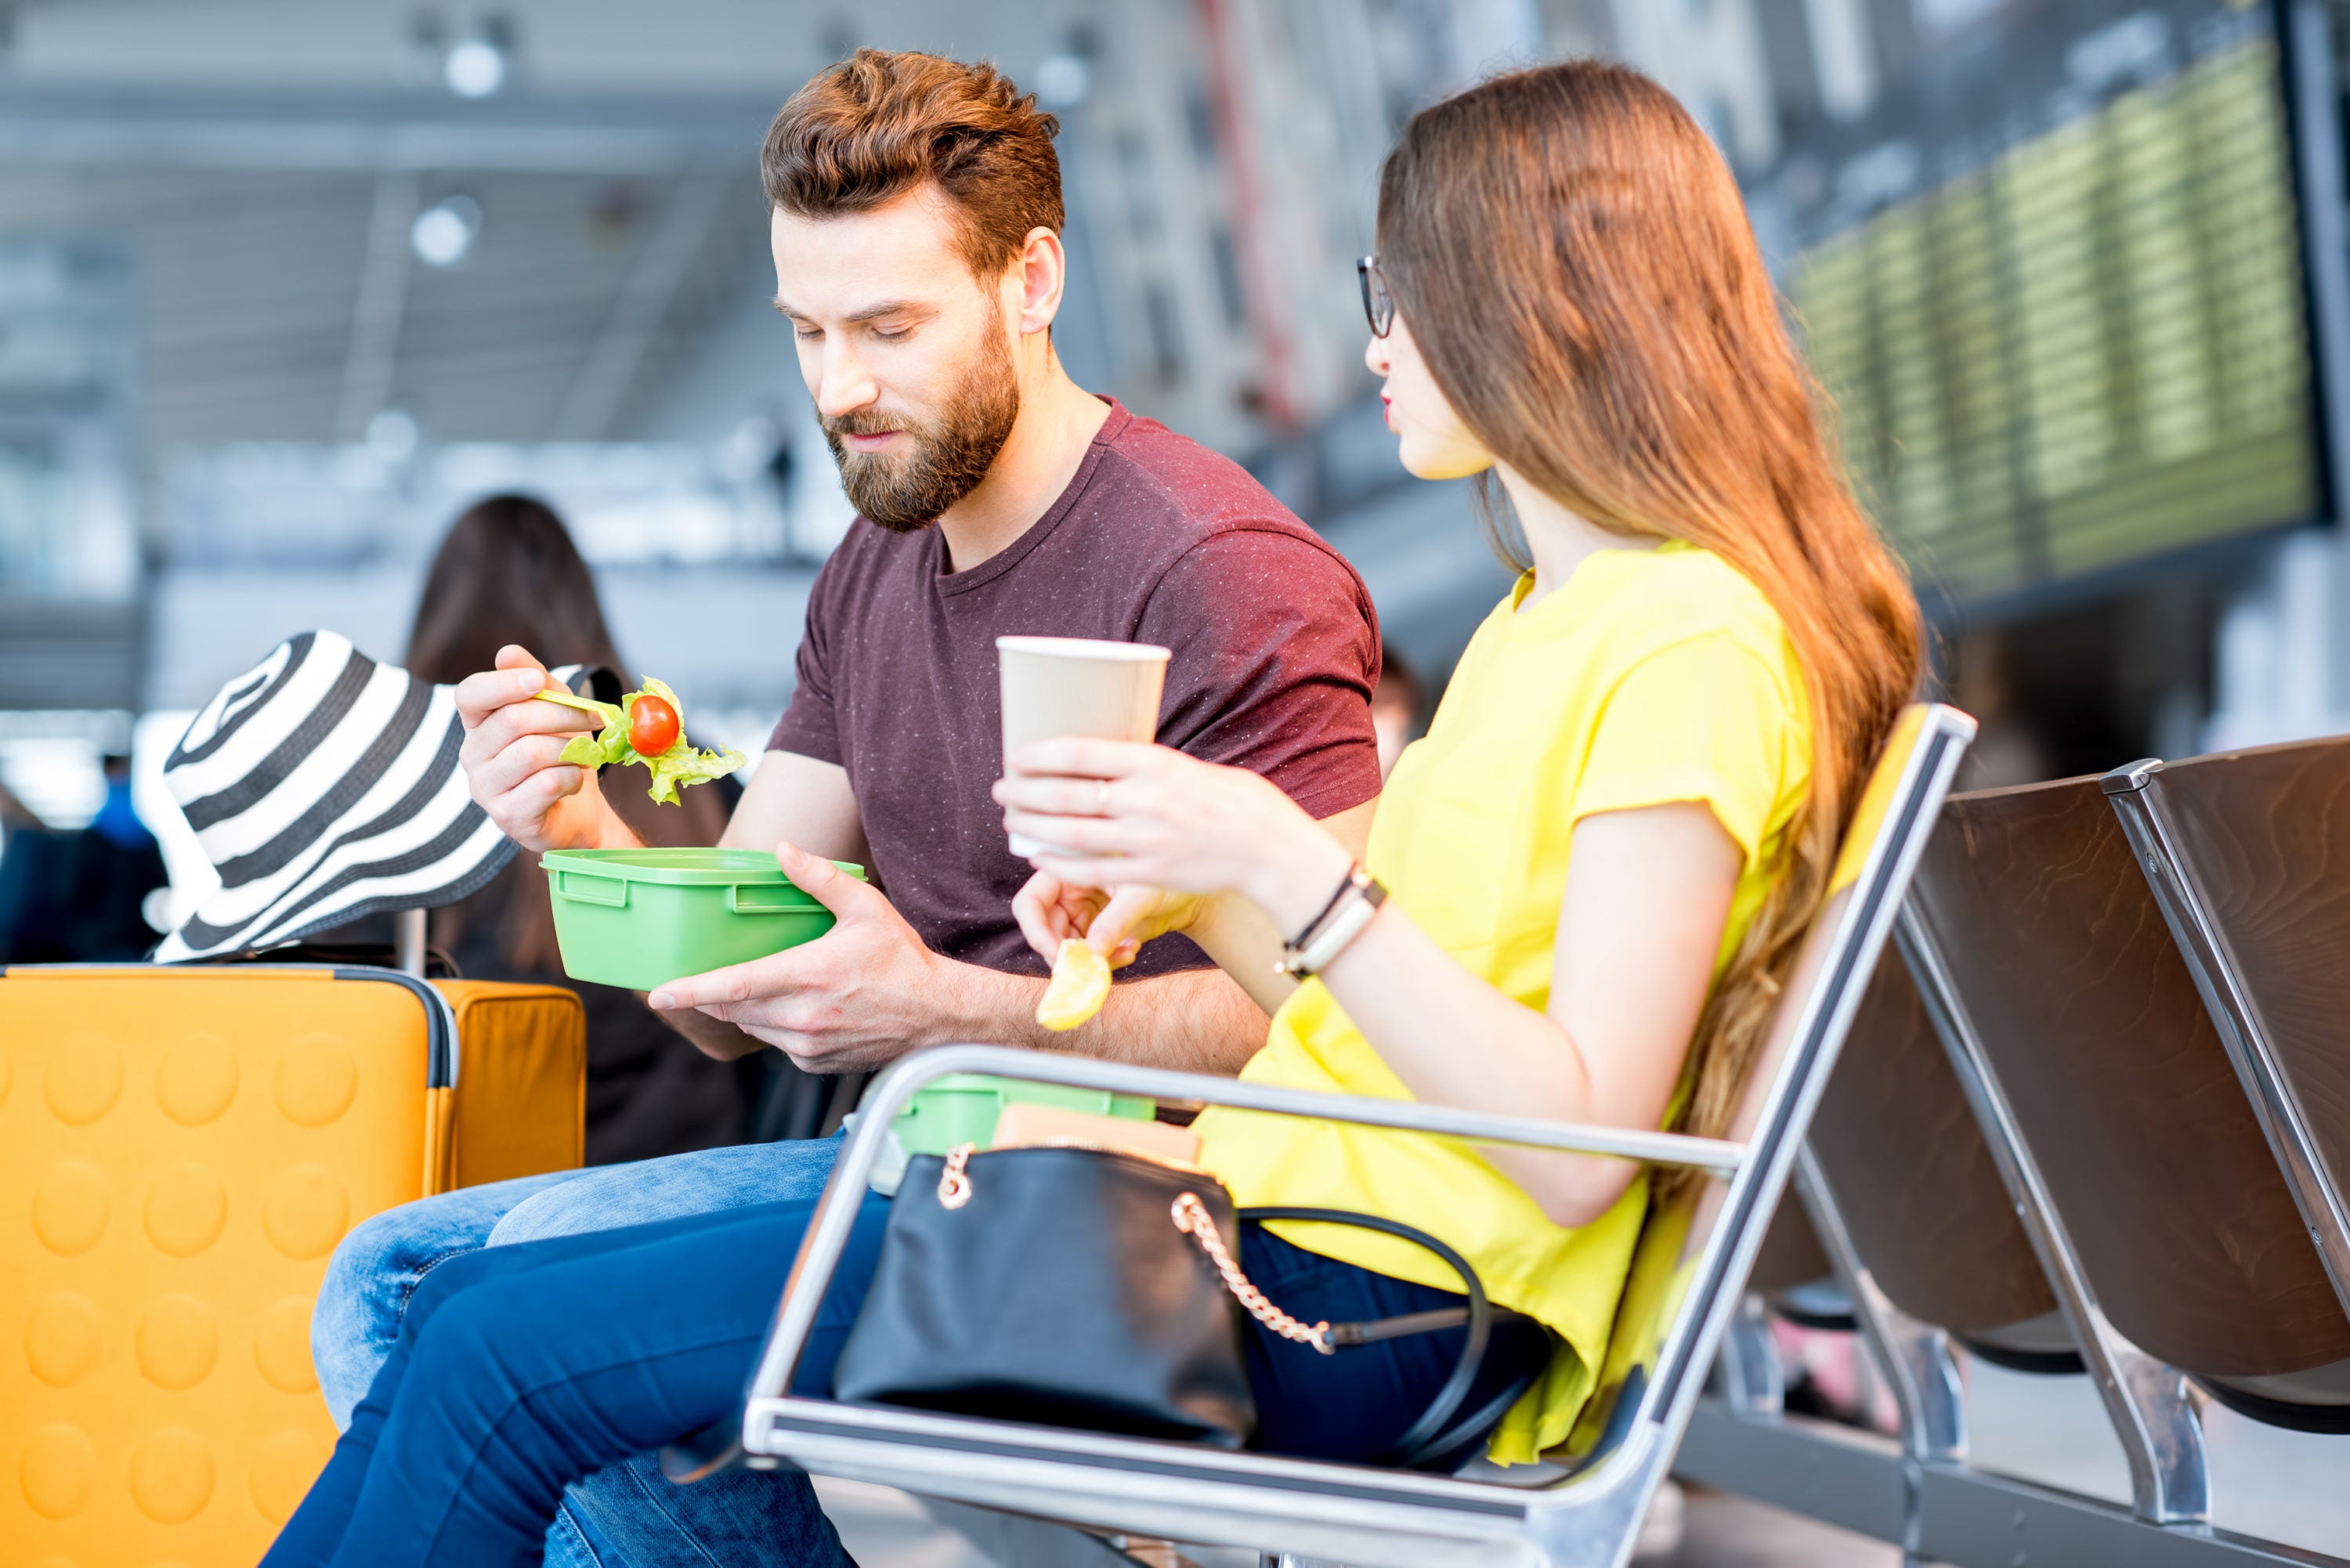 Couple eating drinking at airport looking down